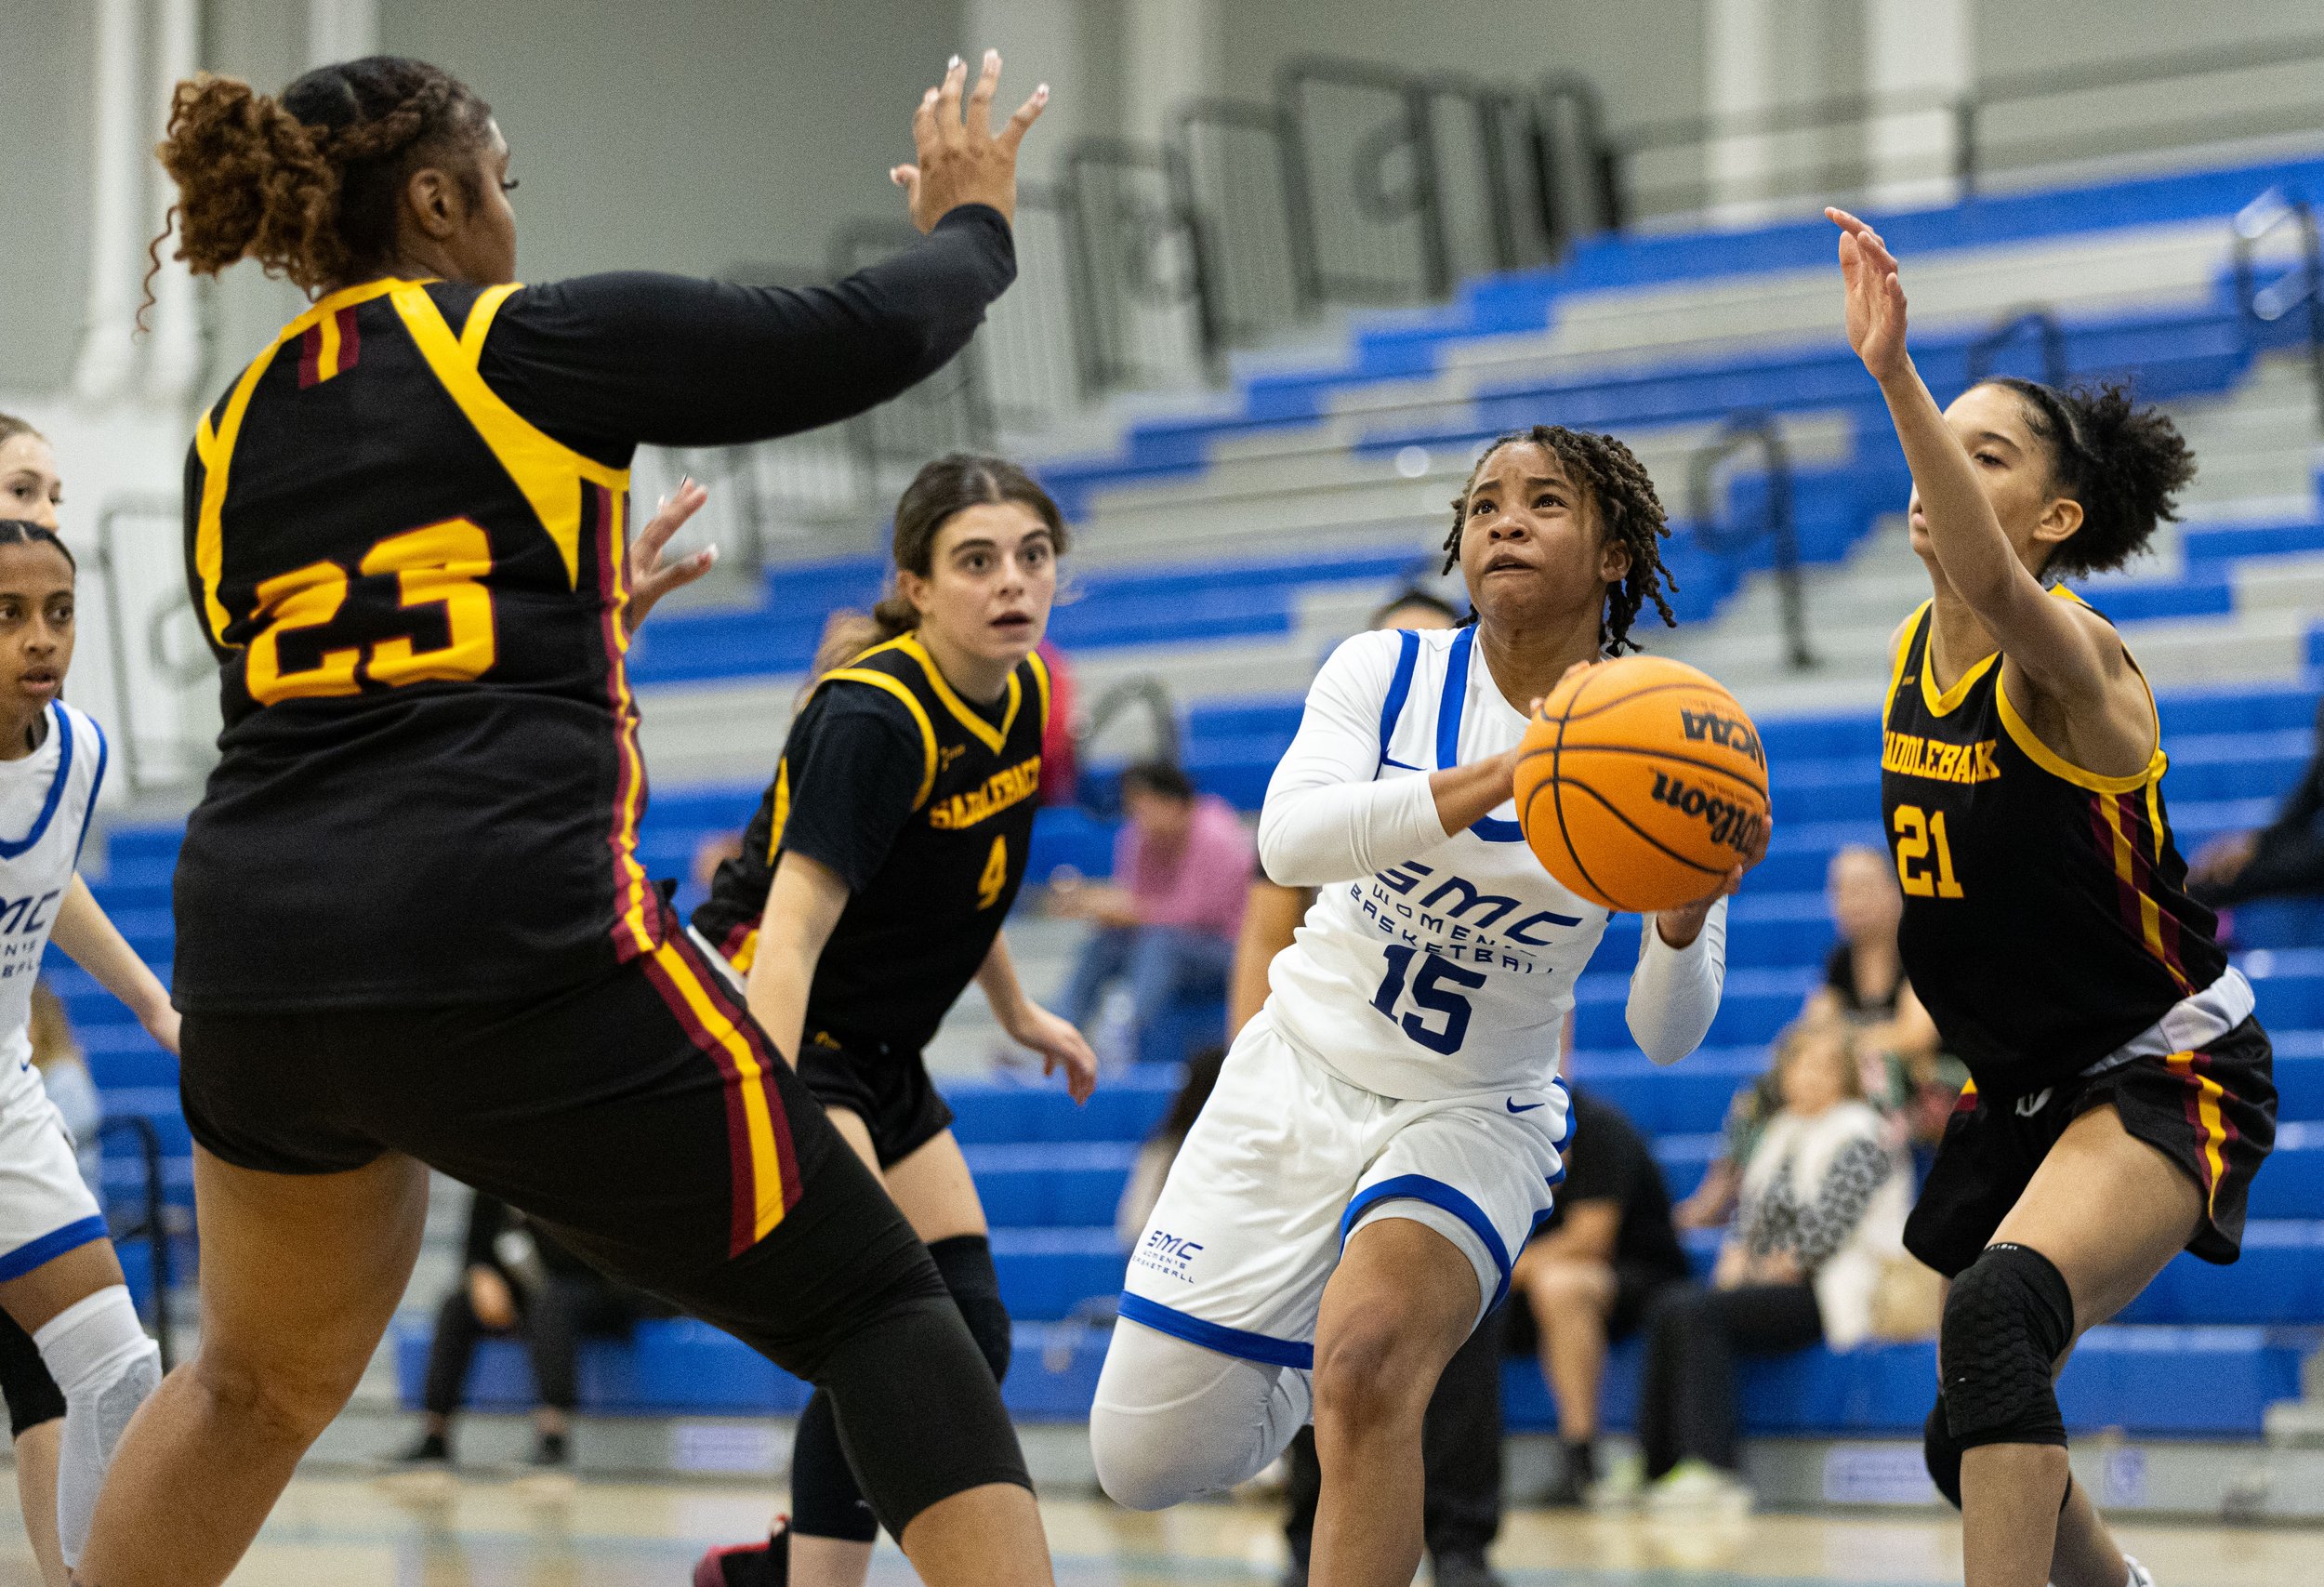  Corsair guard Jayahne Henderson(15) from Santa Monica College(SMC) going for the layup against Saddleback College Bobcat Serenity Fields(23) in the SMC Pavillion Gym at Santa Monica, Calif. Corsairs lost 62-50 to put them in a 3-game losing streak o